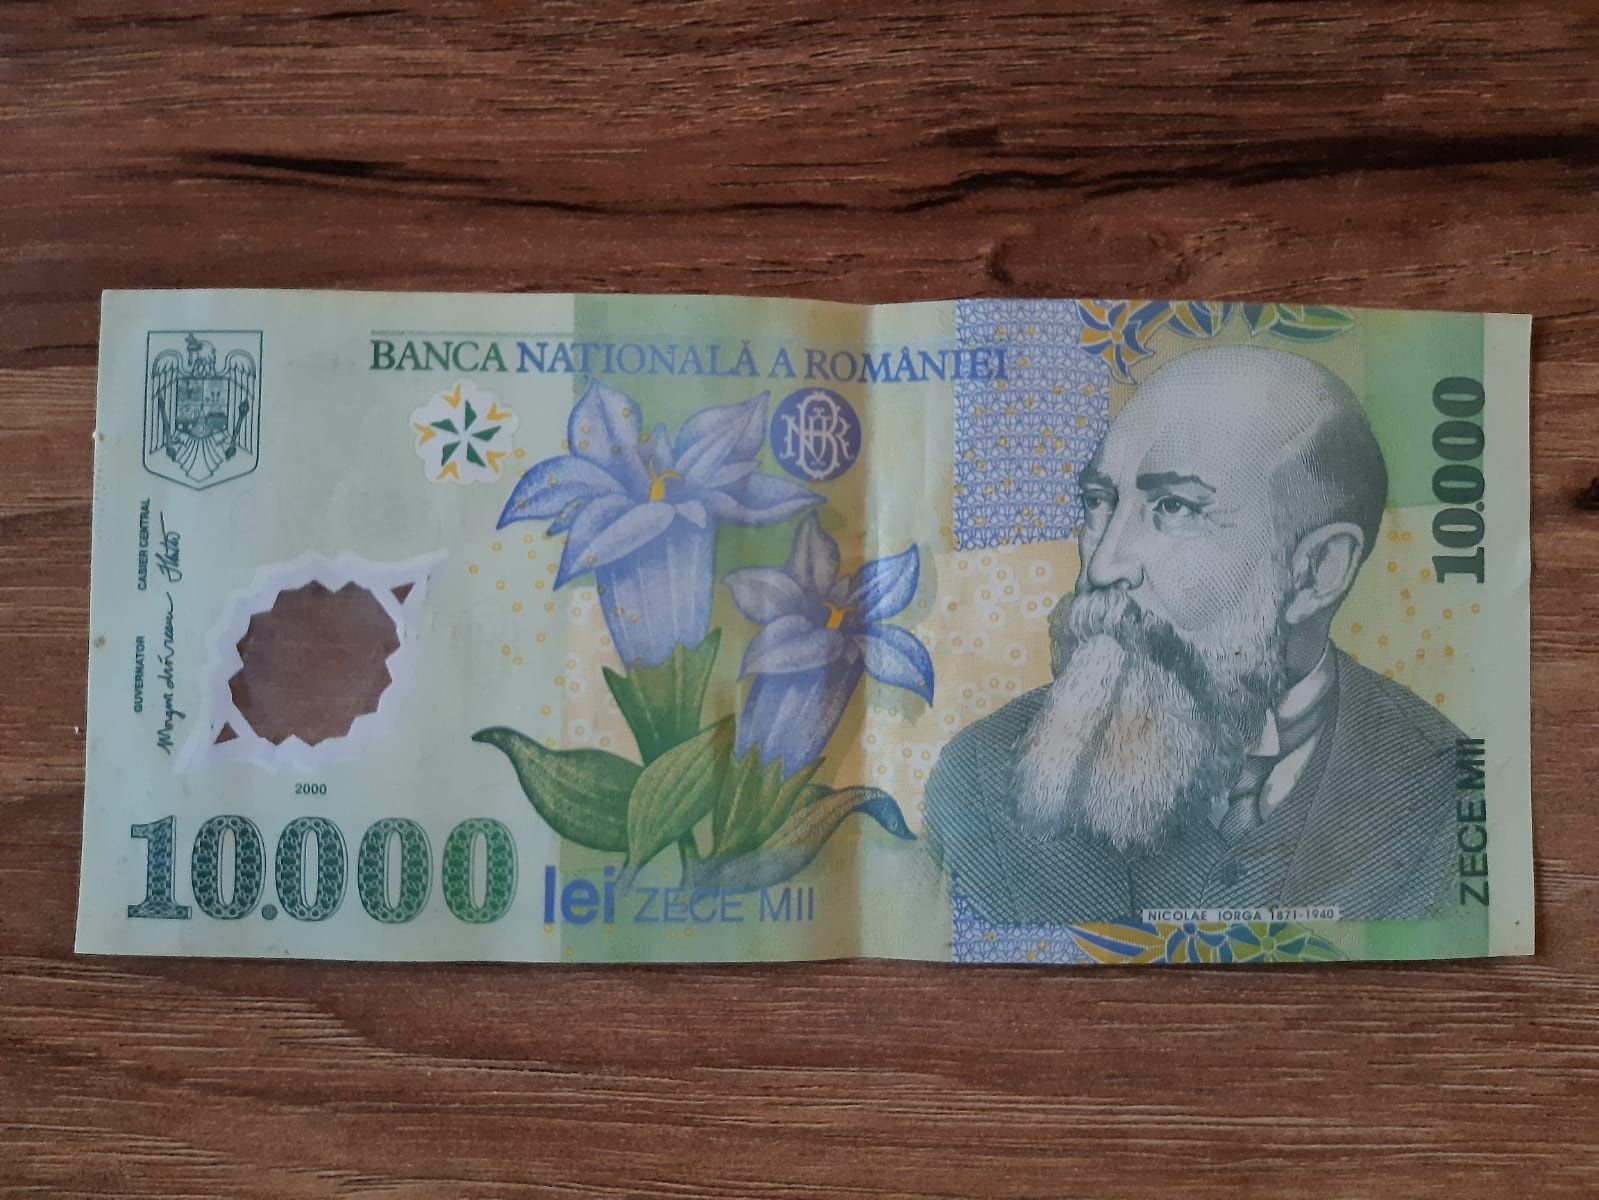 Vând bagnote vechi 2000 lei